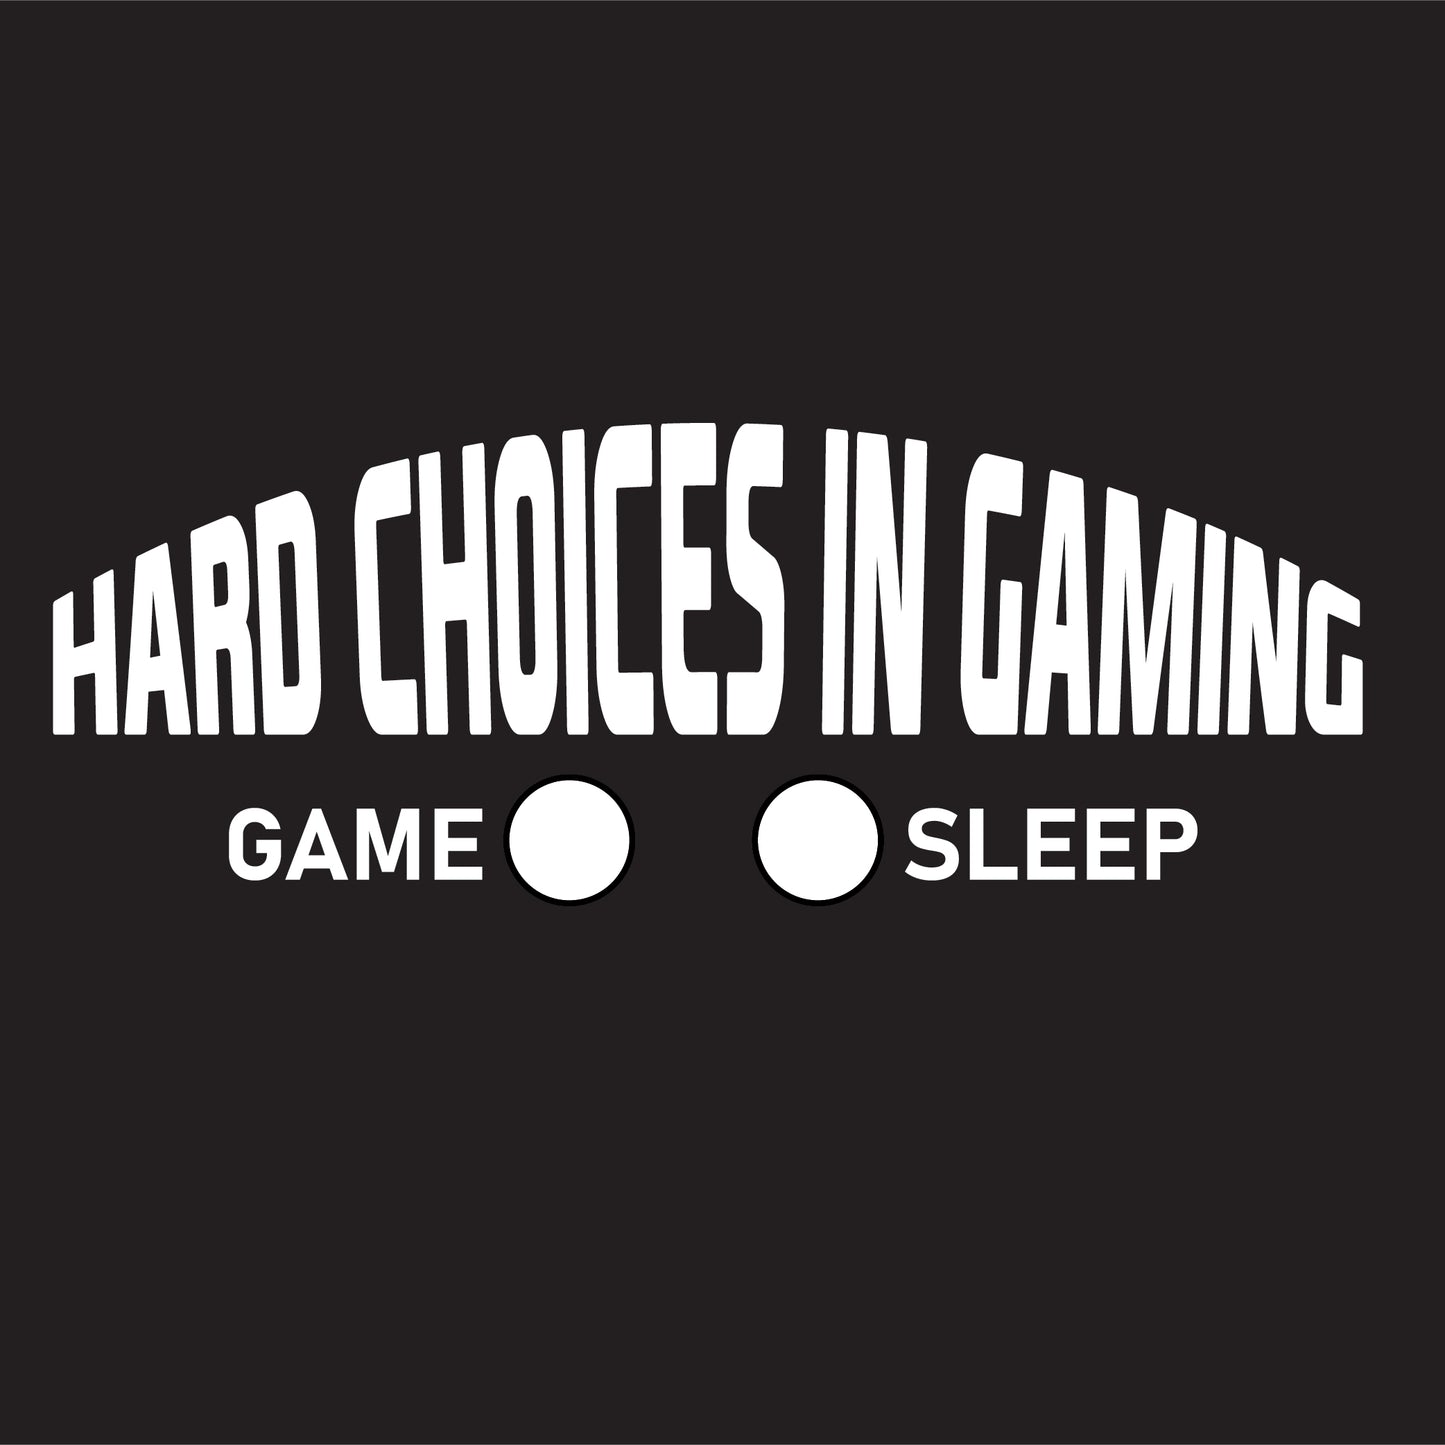 Hard Choices In Gaming